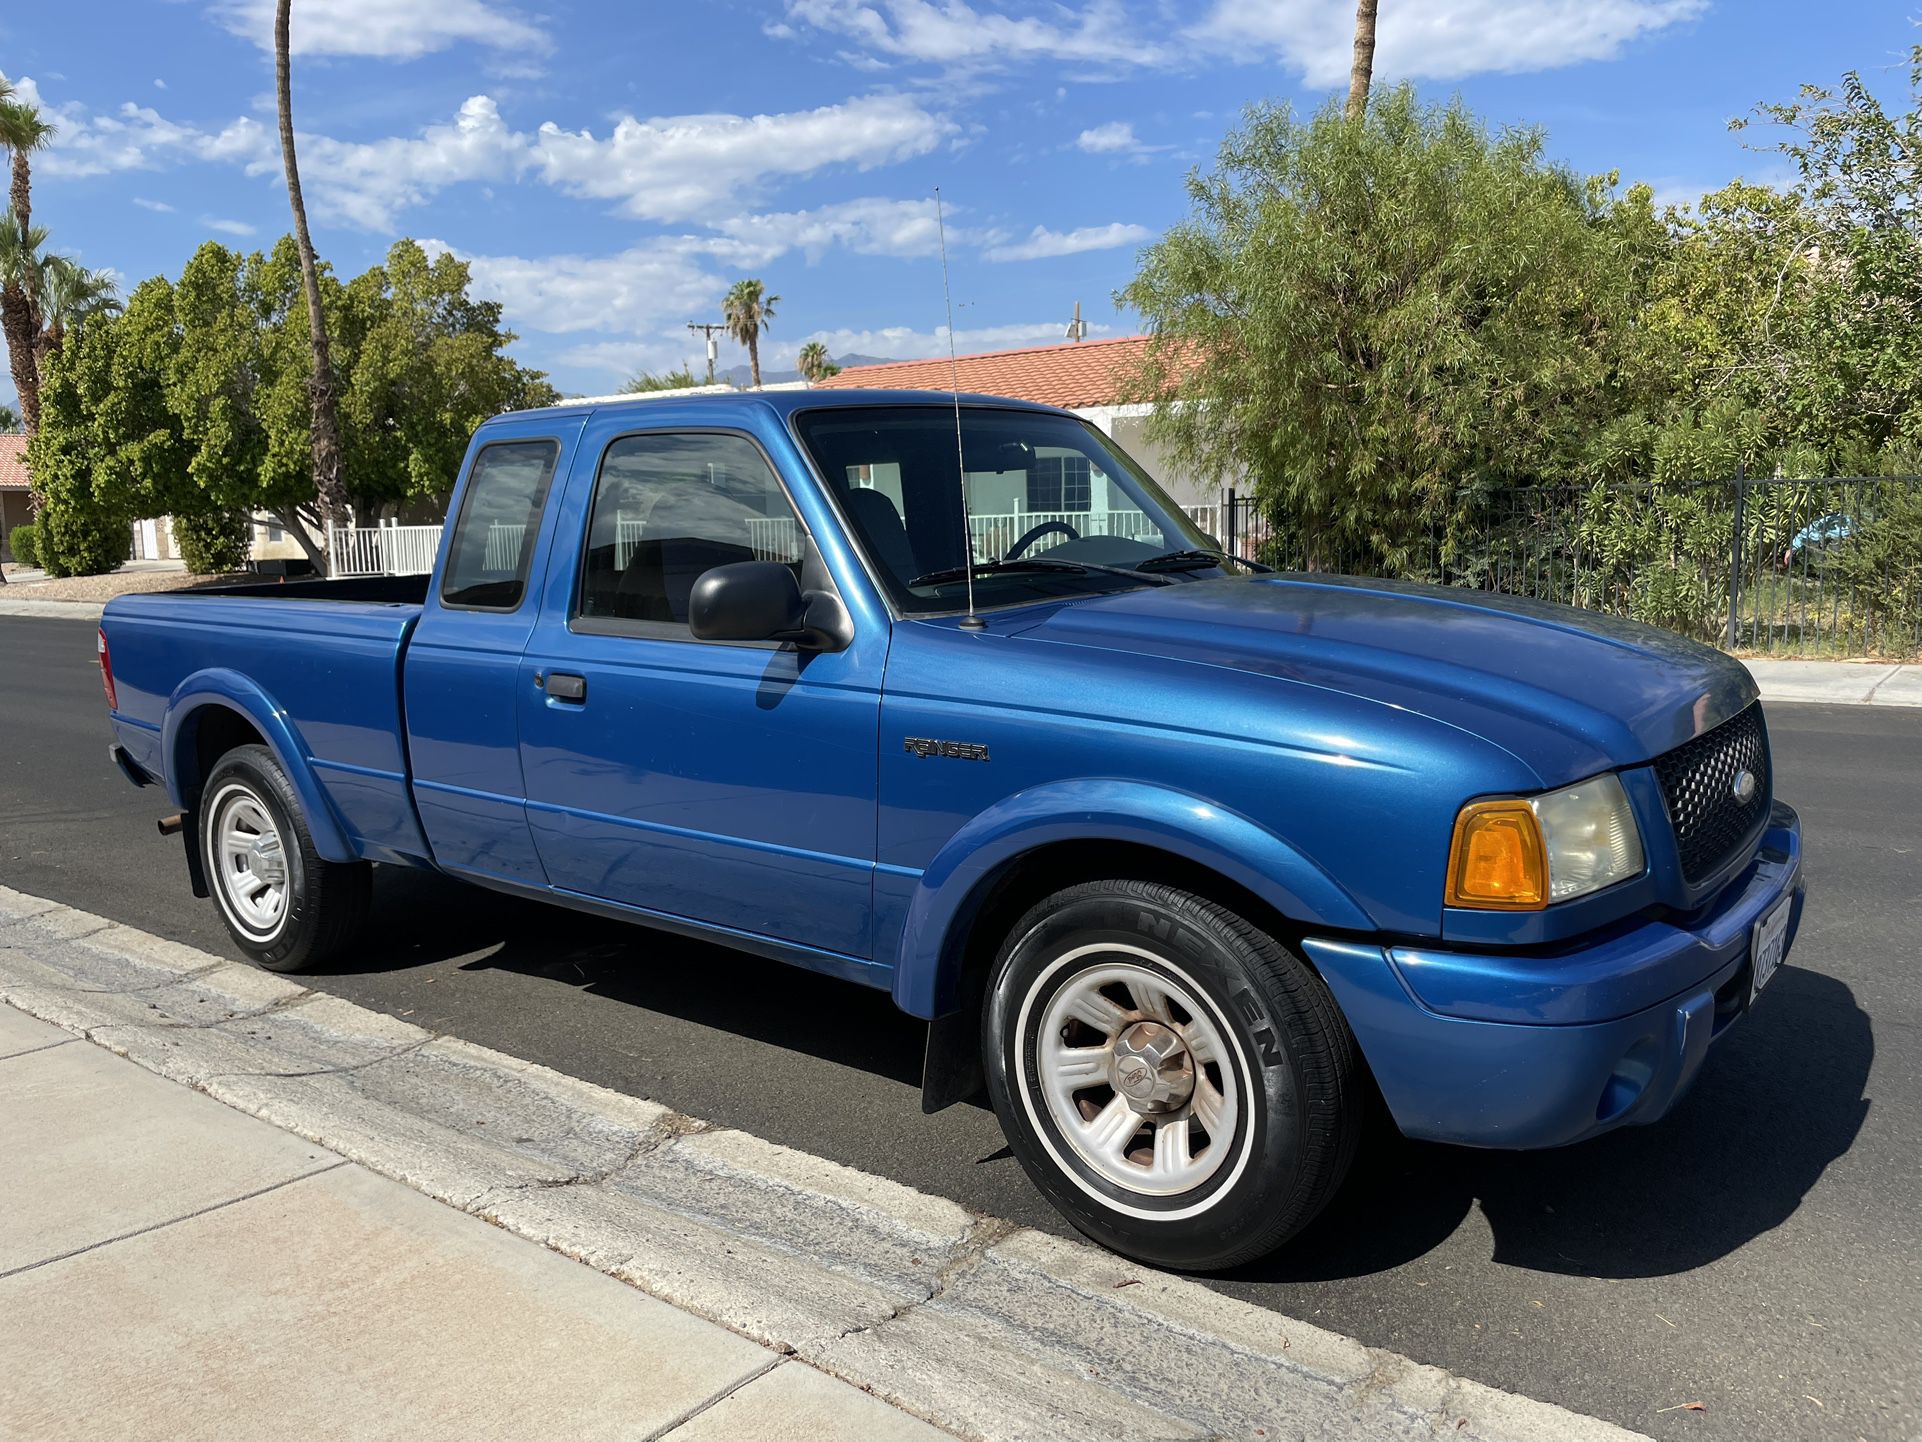 2001 Ford Ranger For Sale In Cathedral City Ca Offerup